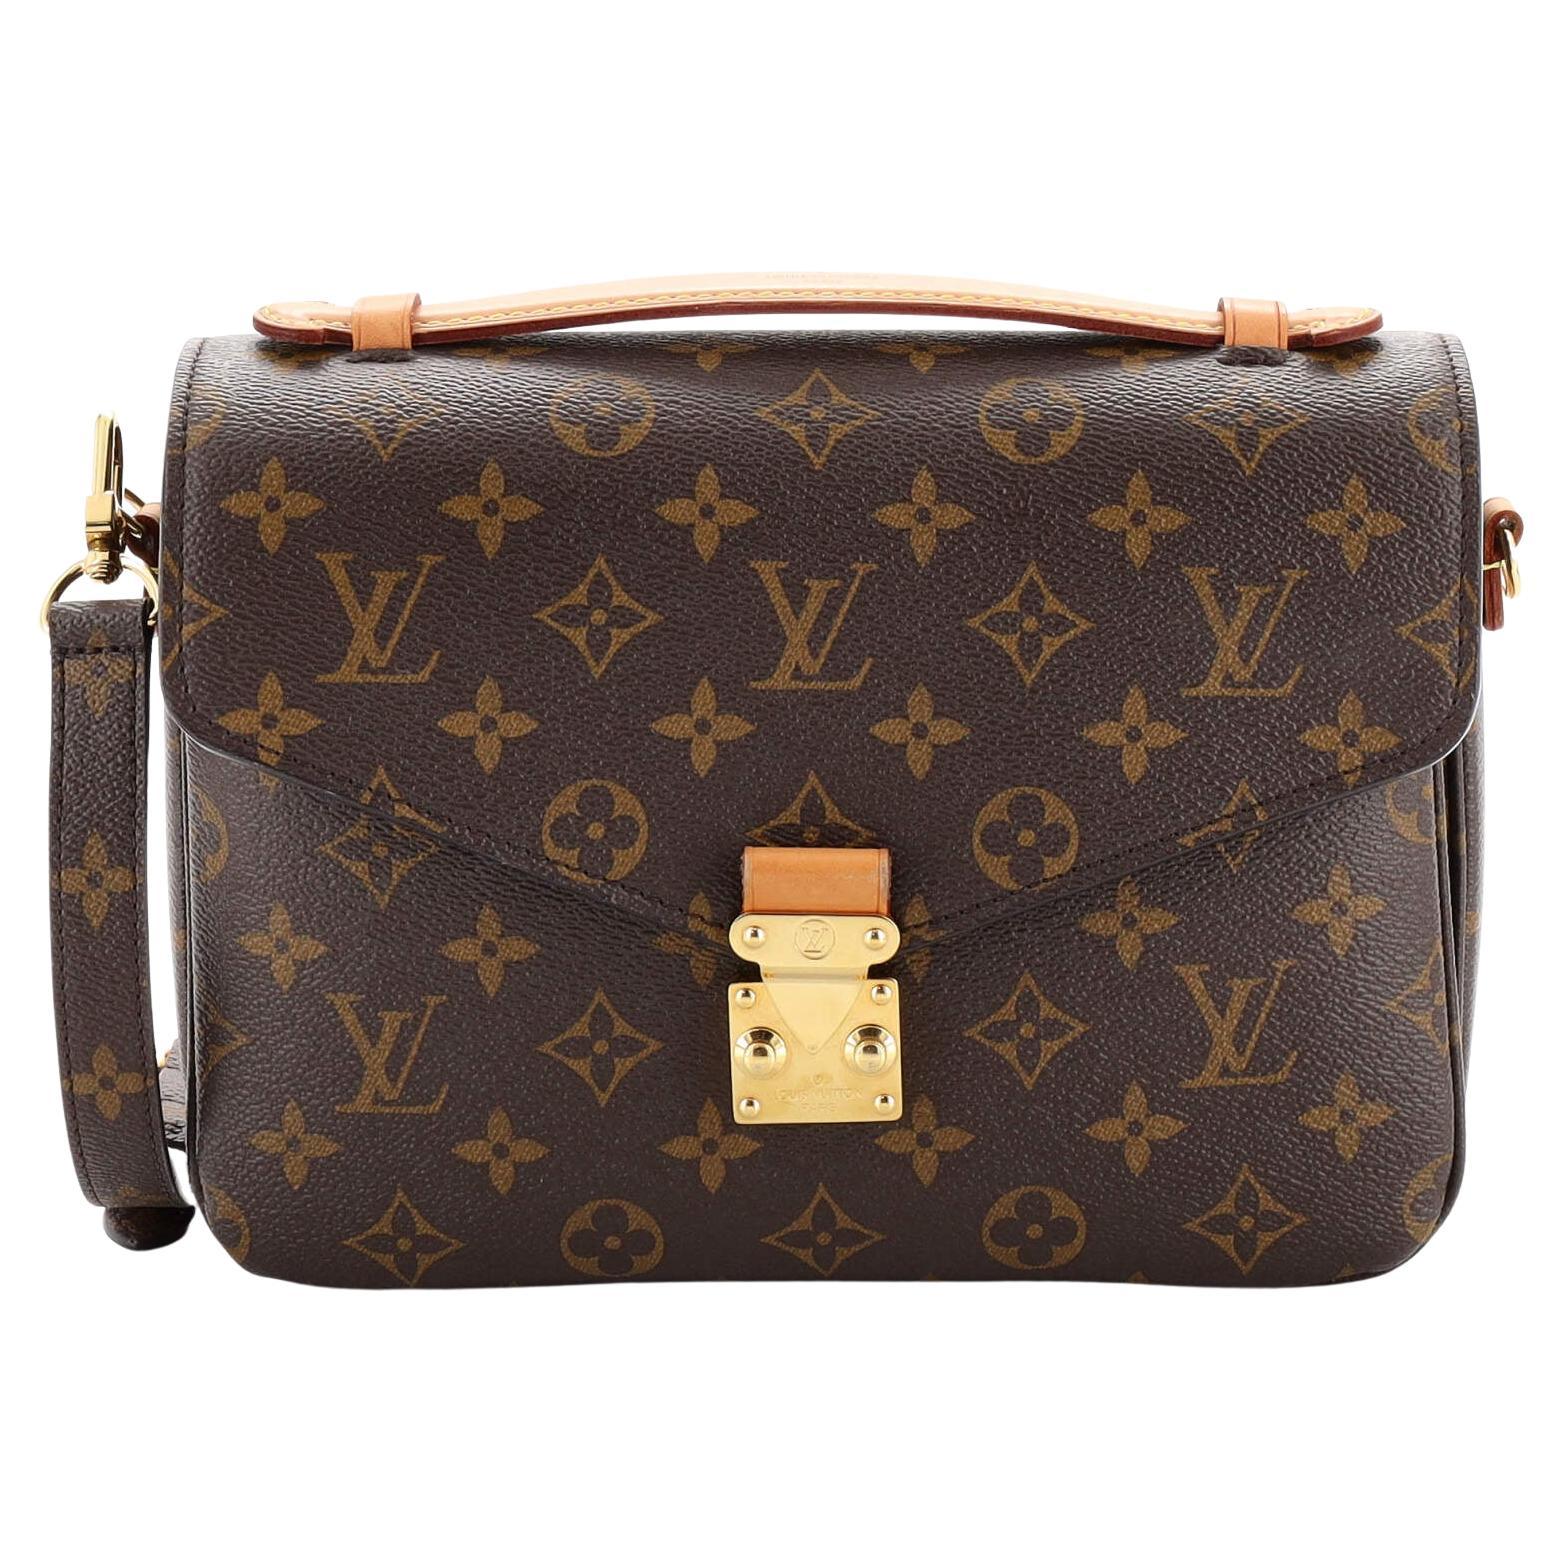 Louis Vuitton Black - 1,808 For Sale on 1stDibs